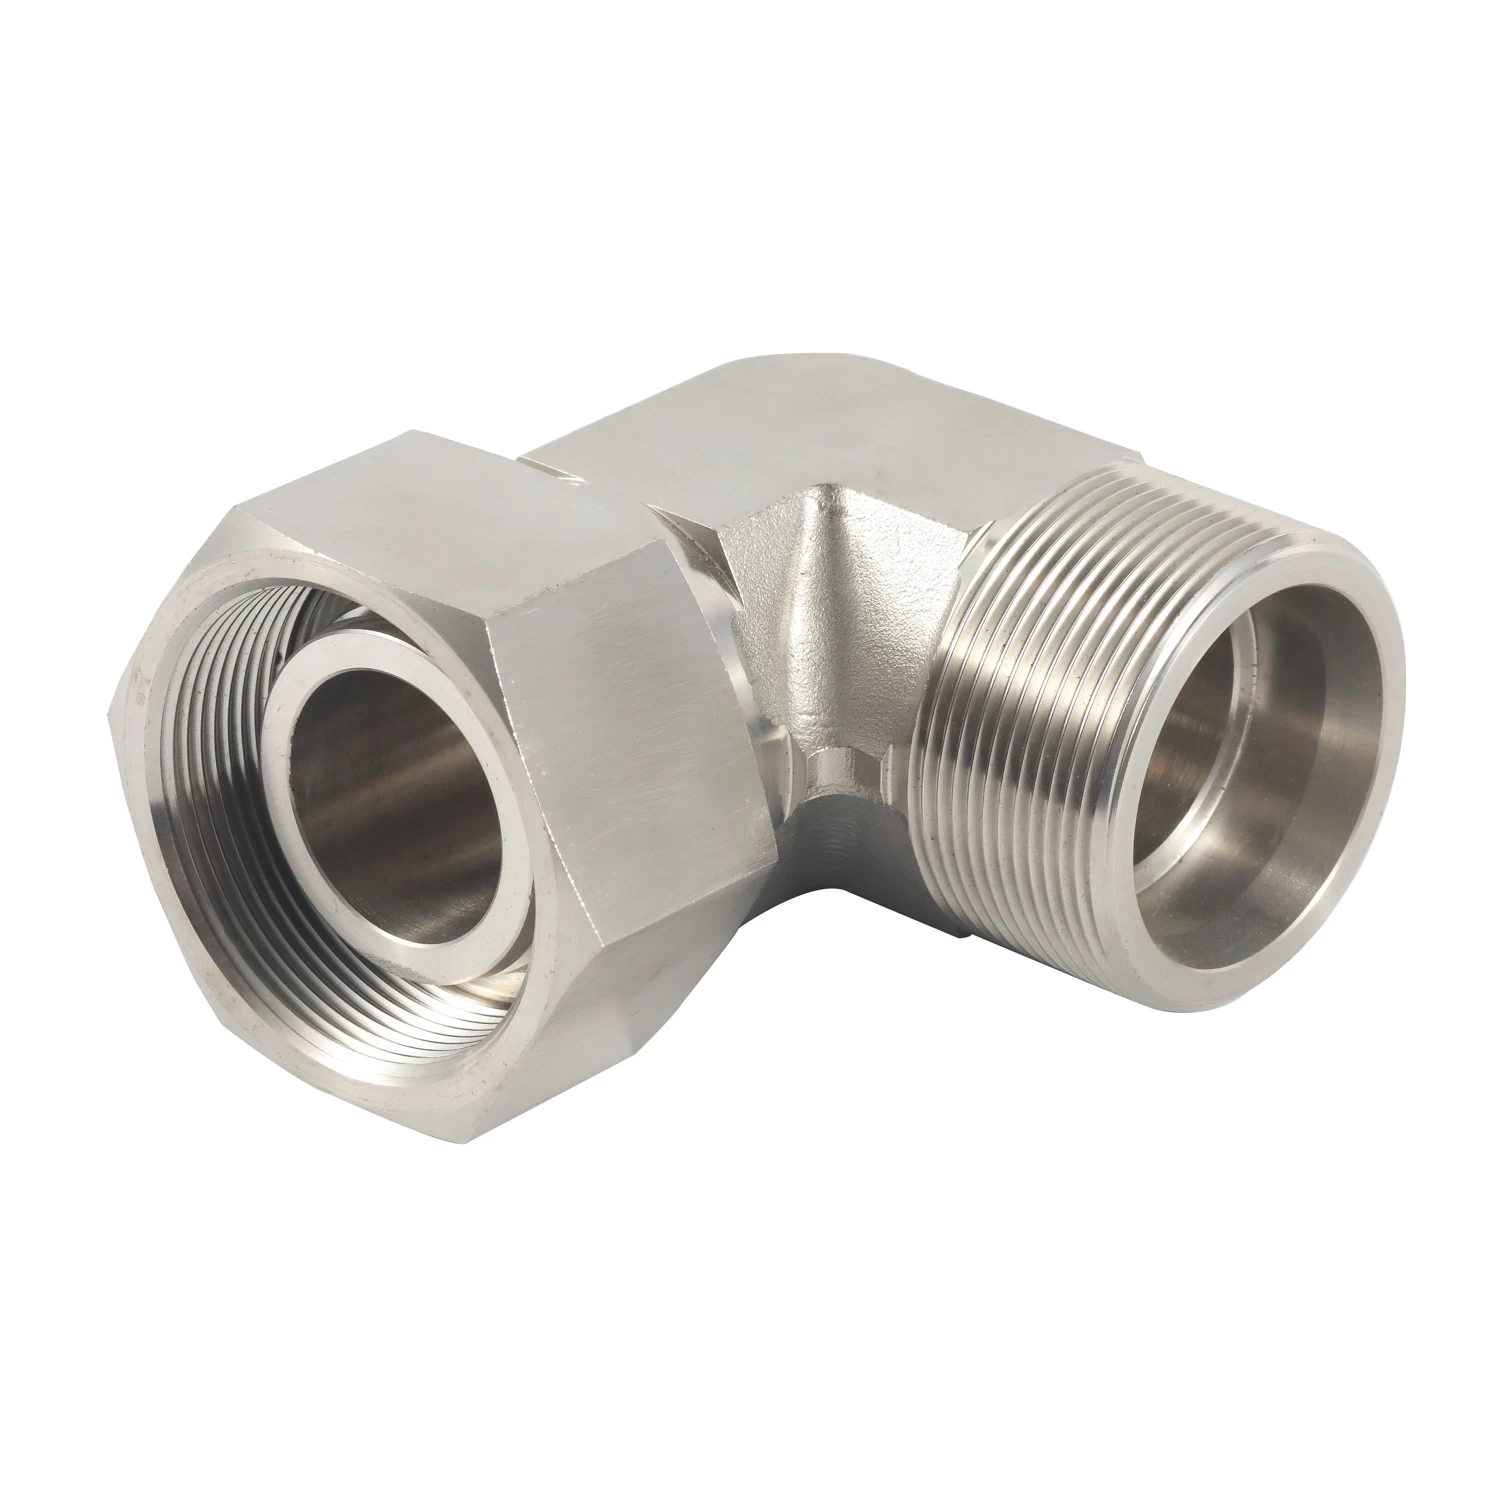 Chine 2C9 90 degree elbow reducer tube adaptor with swivel nut fabricant